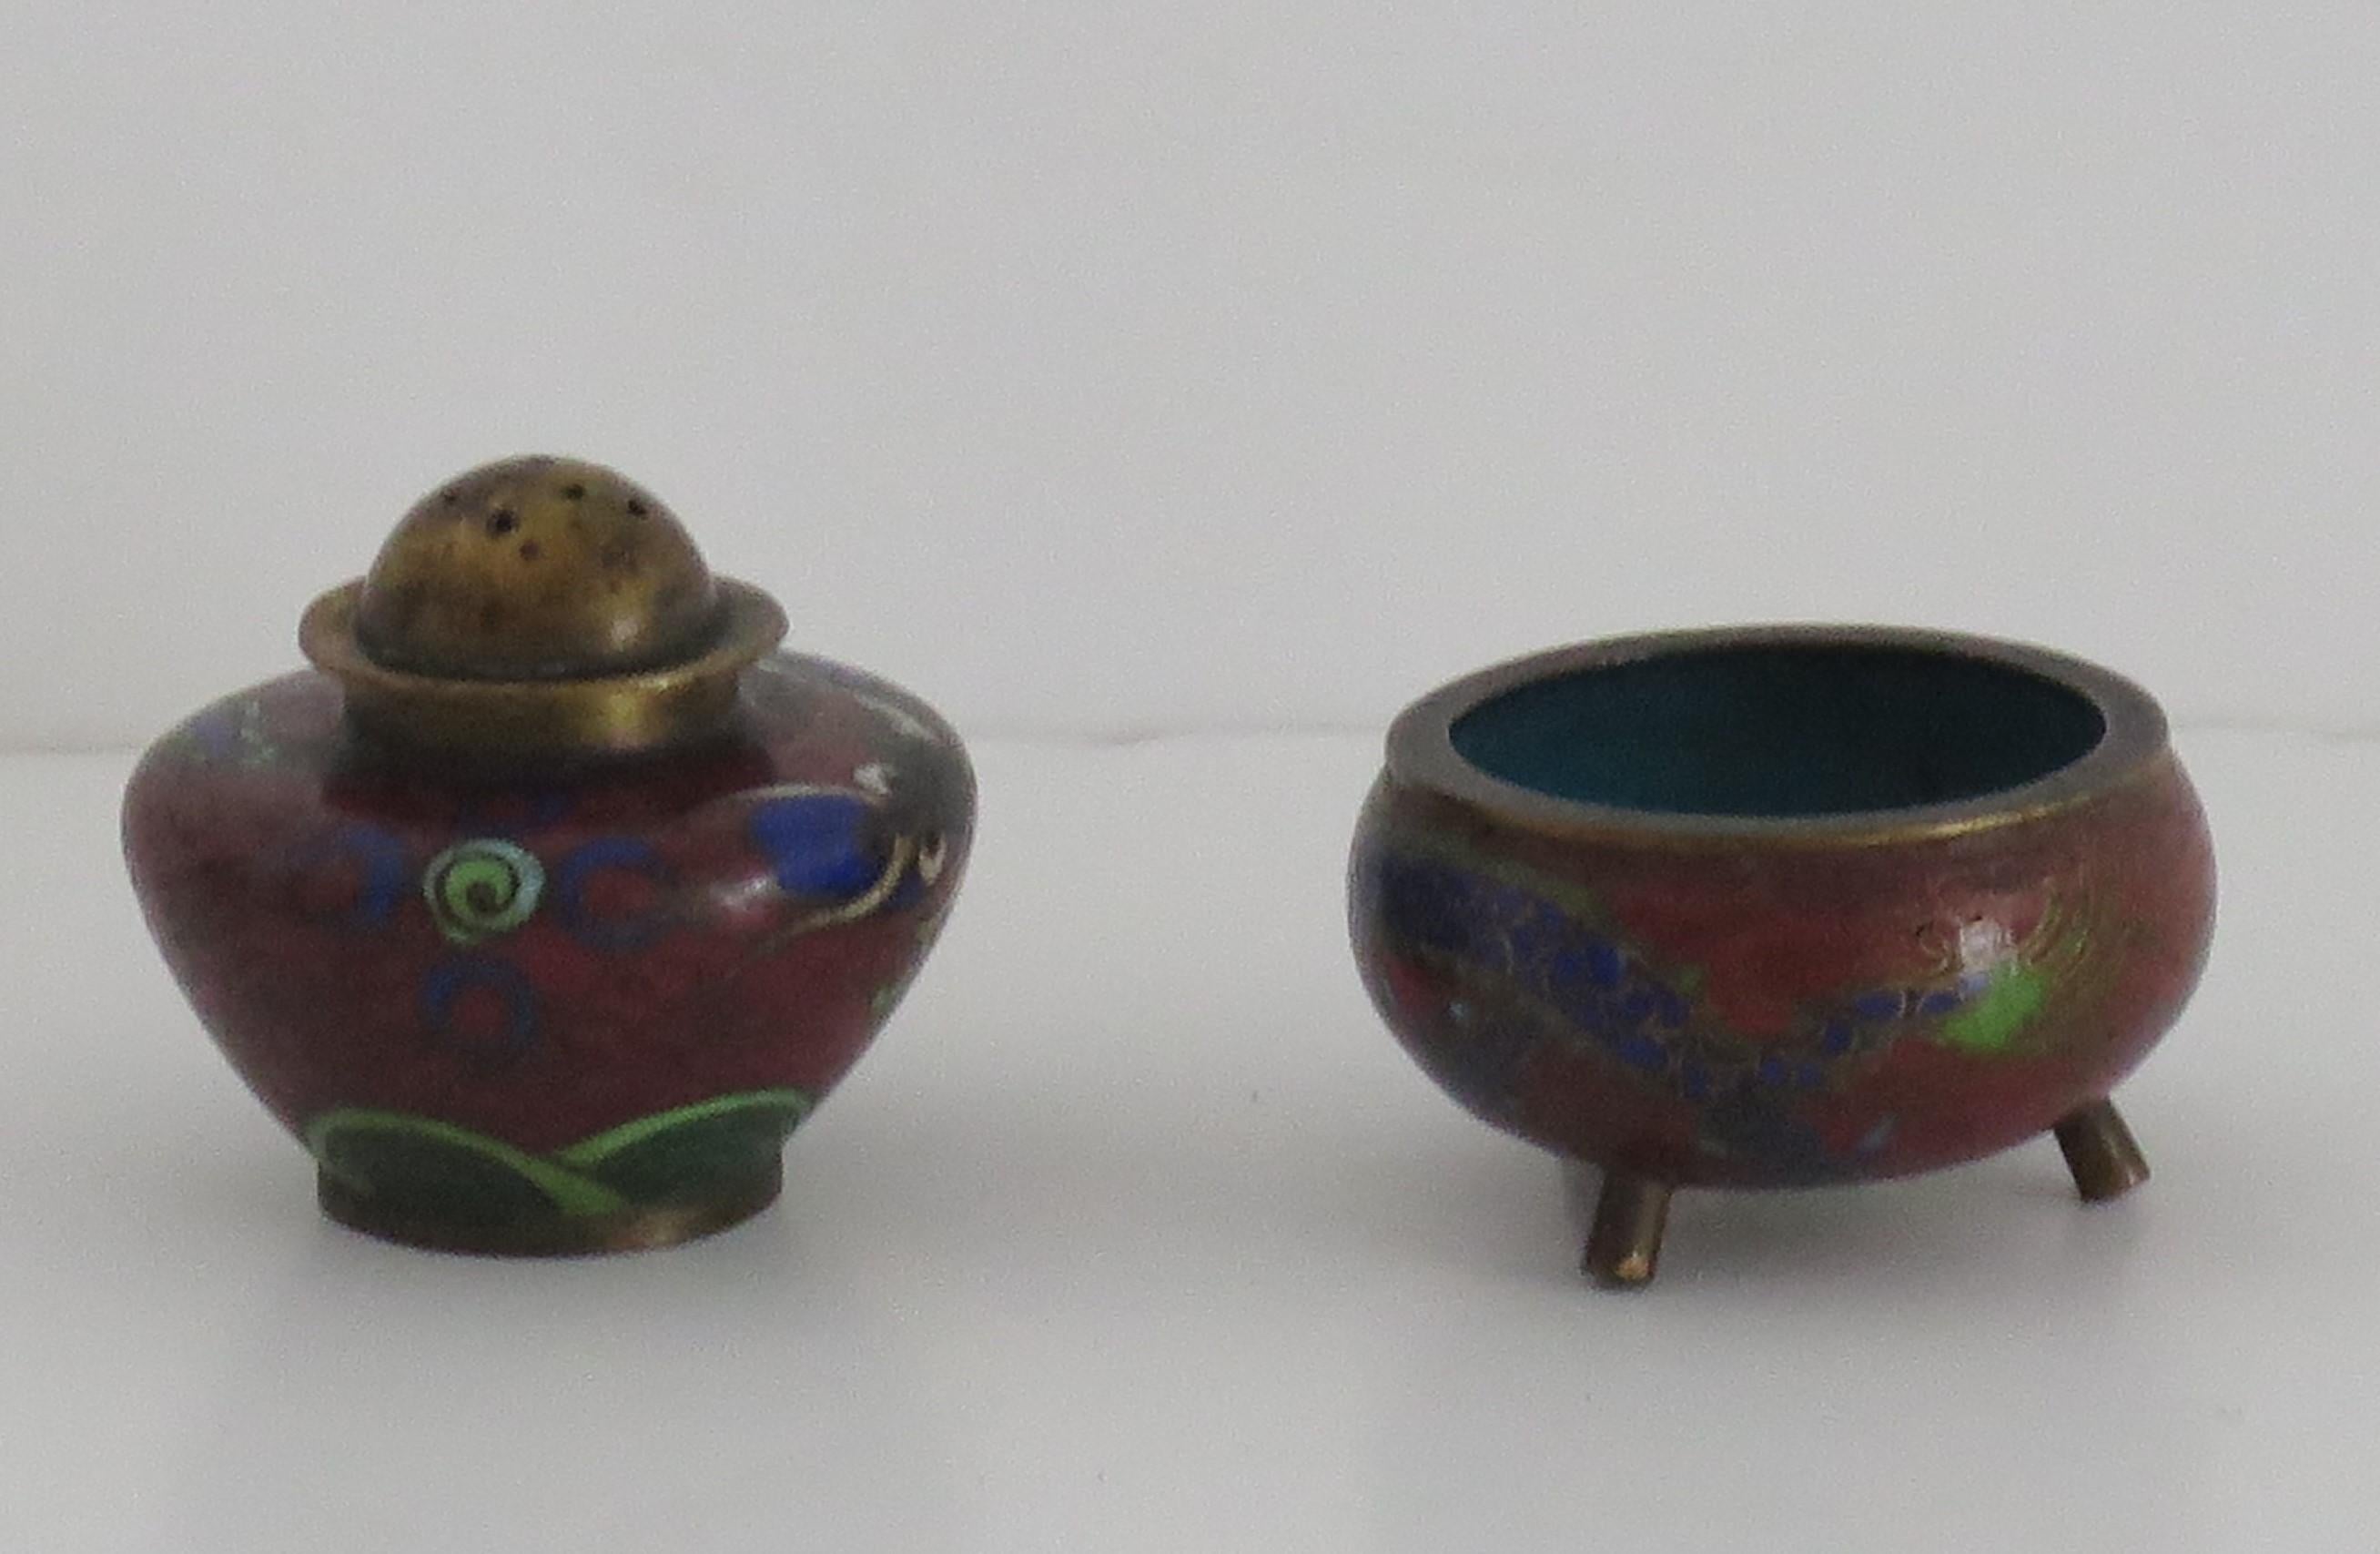 Ceramic 19th Century Chinese Cloisonné Salt and Pepper Pot with Dragon Decoration, Qing For Sale